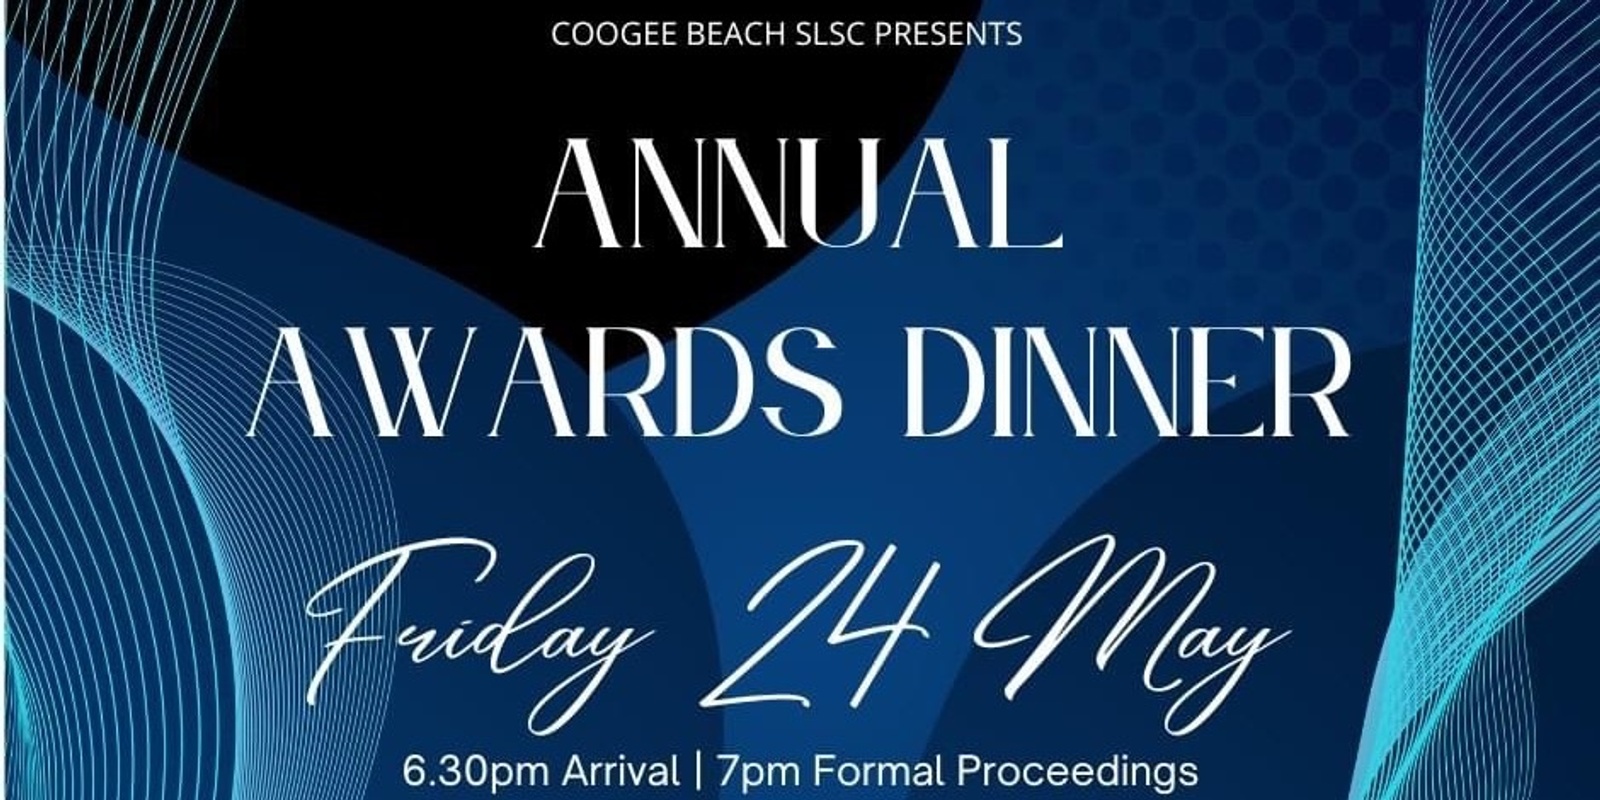 Banner image for Club Annual Dinner